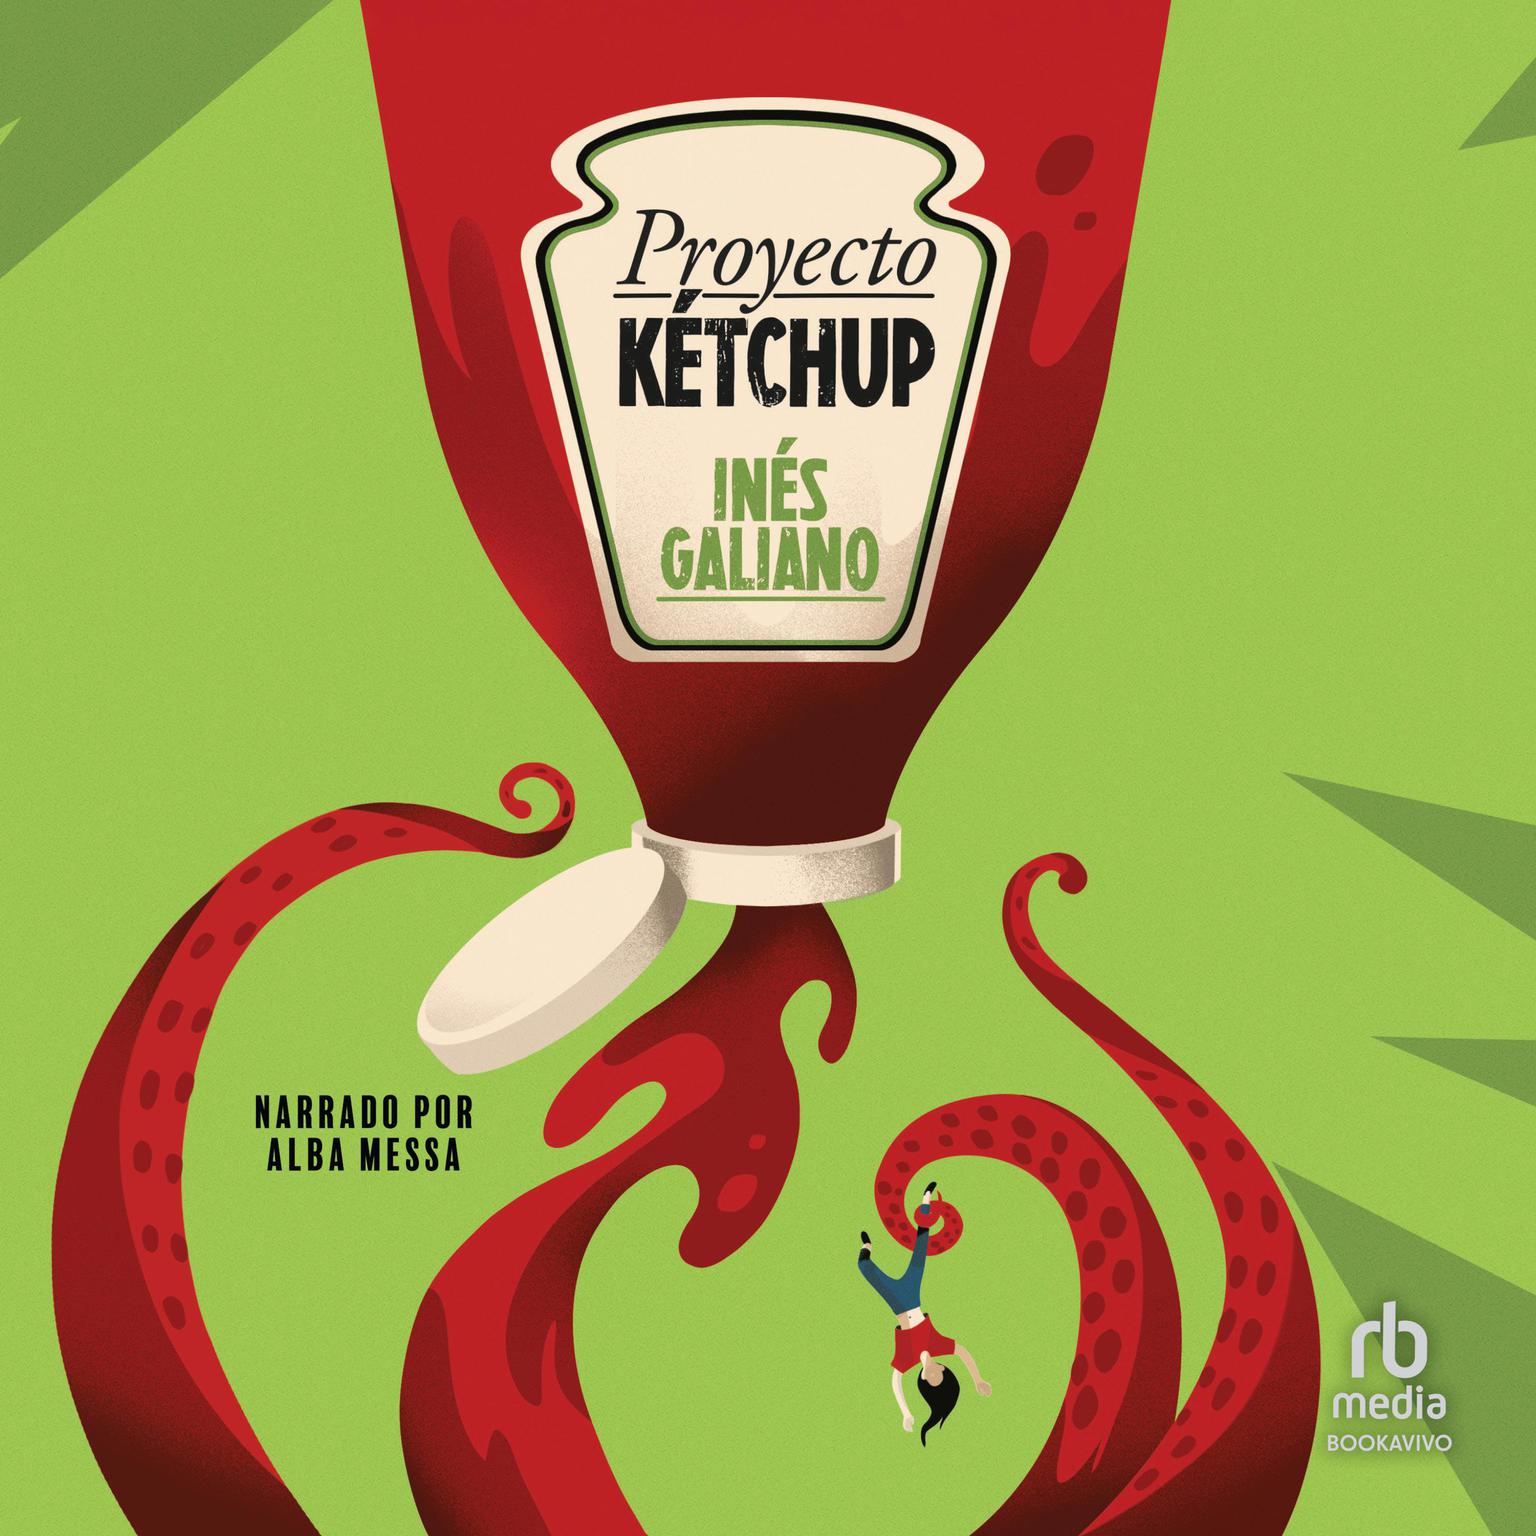 Proyecto Ketchup (Ketchup Project) Audiobook, by Ines Galiano